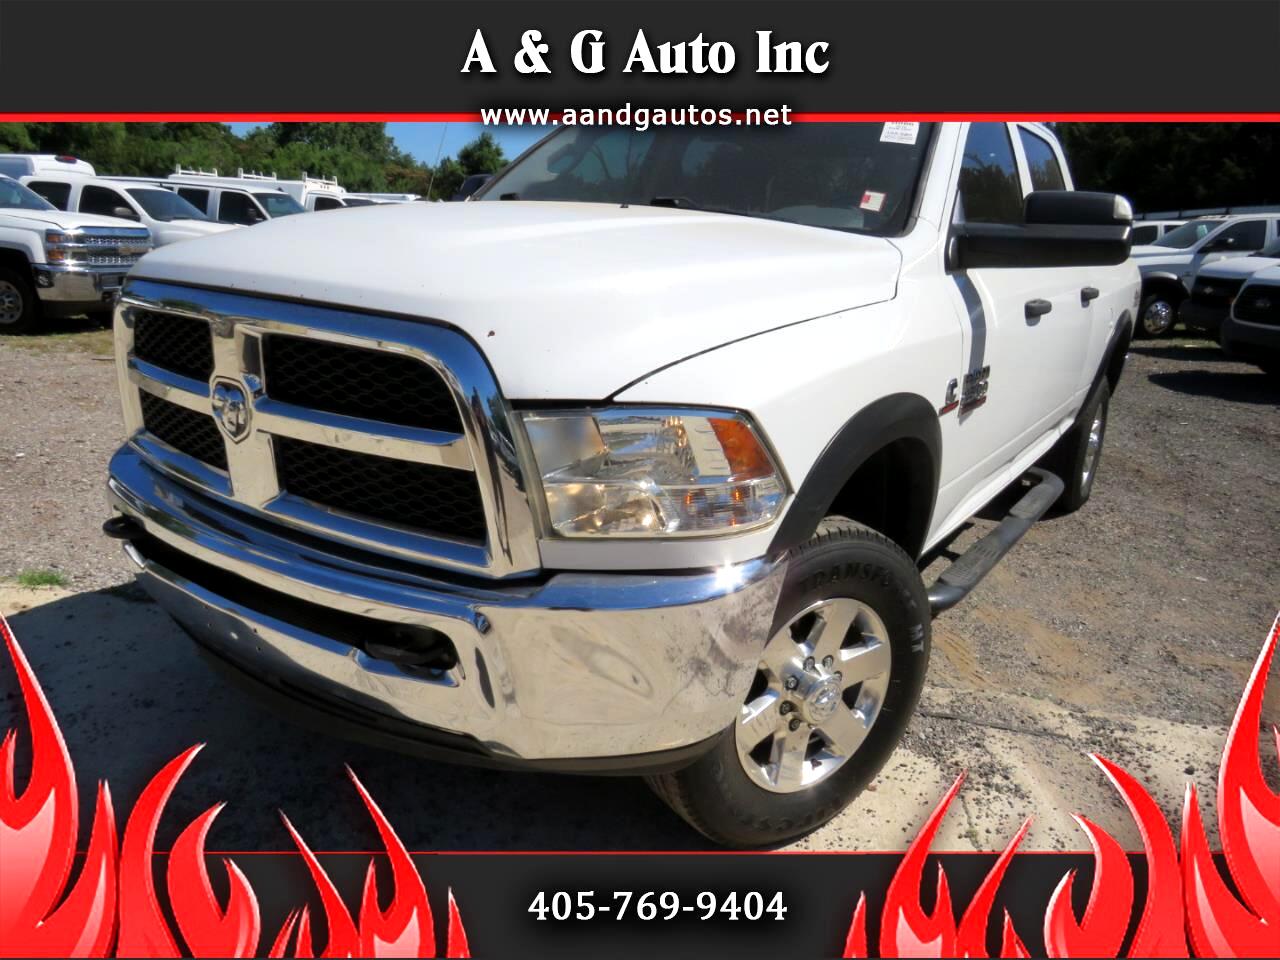 2018 Dodge Ram 2500 for sale in Oklahoma City OK 73141 by A & G Auto Inc